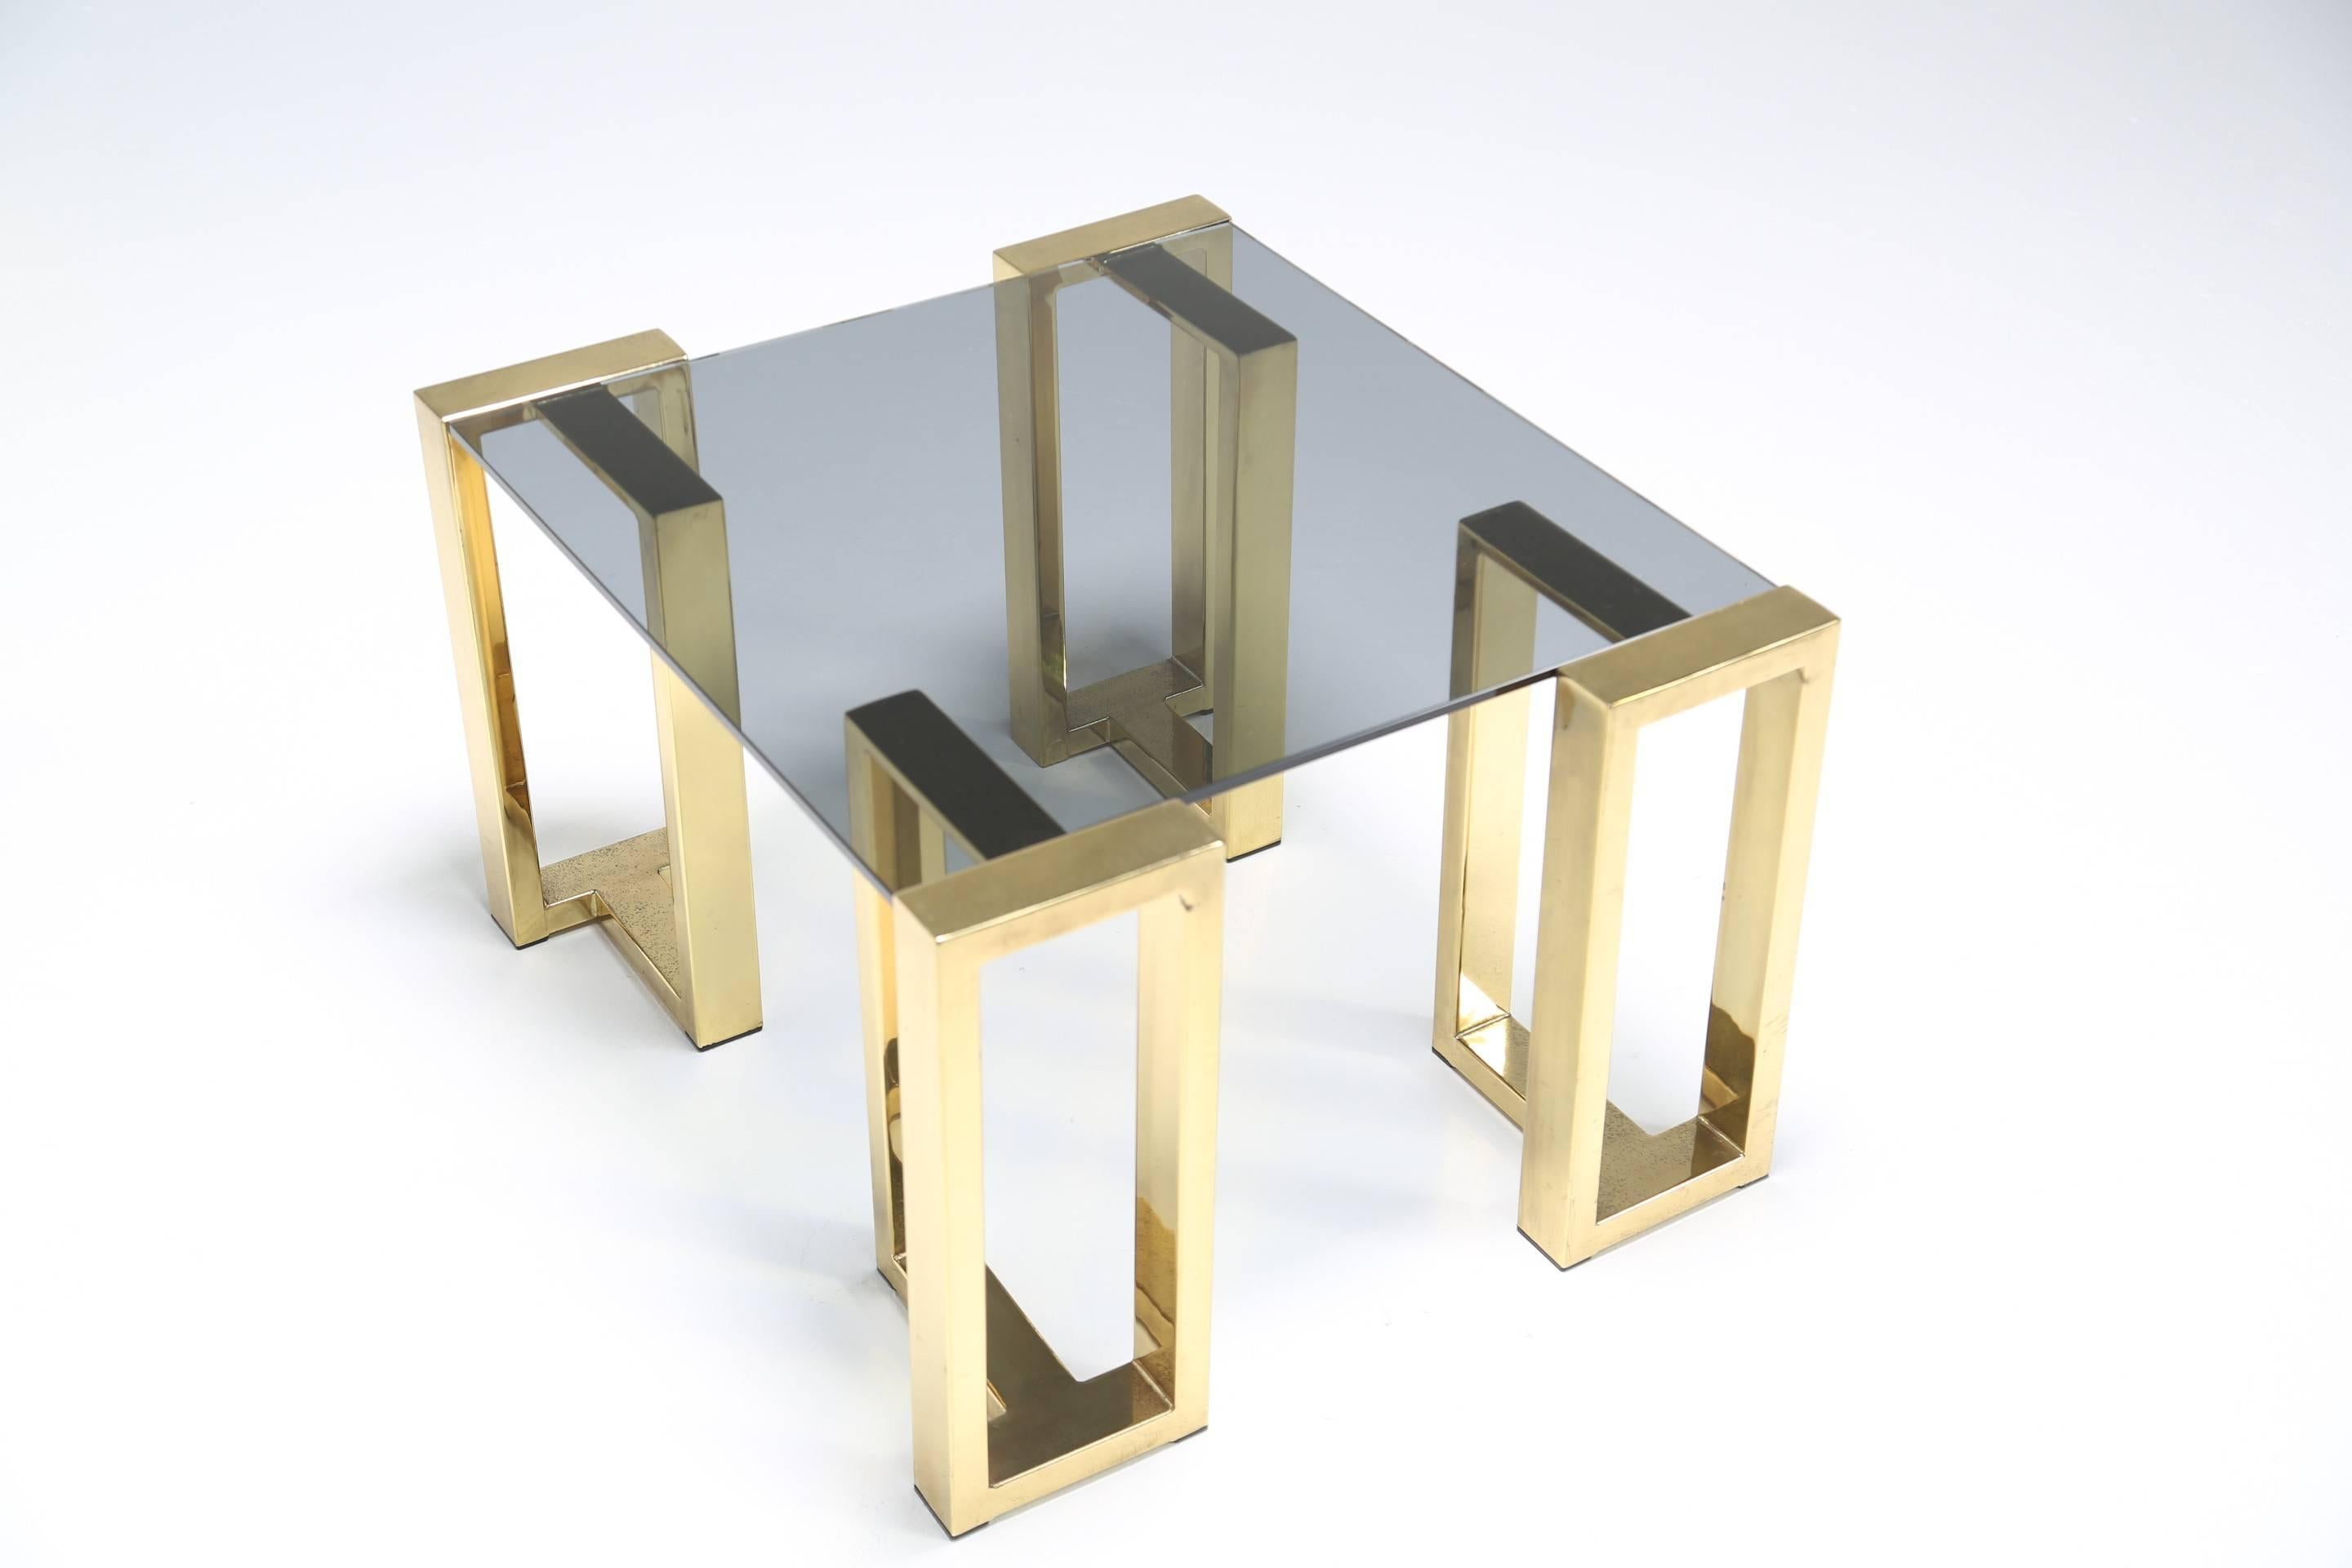 A very elegant brass and glass coffee table made up of separate legs that hold a glass tabletop in place. This would probably work best as an end table either beside a sofa, chair or bed. It is a small size coffee table or decent size end table.